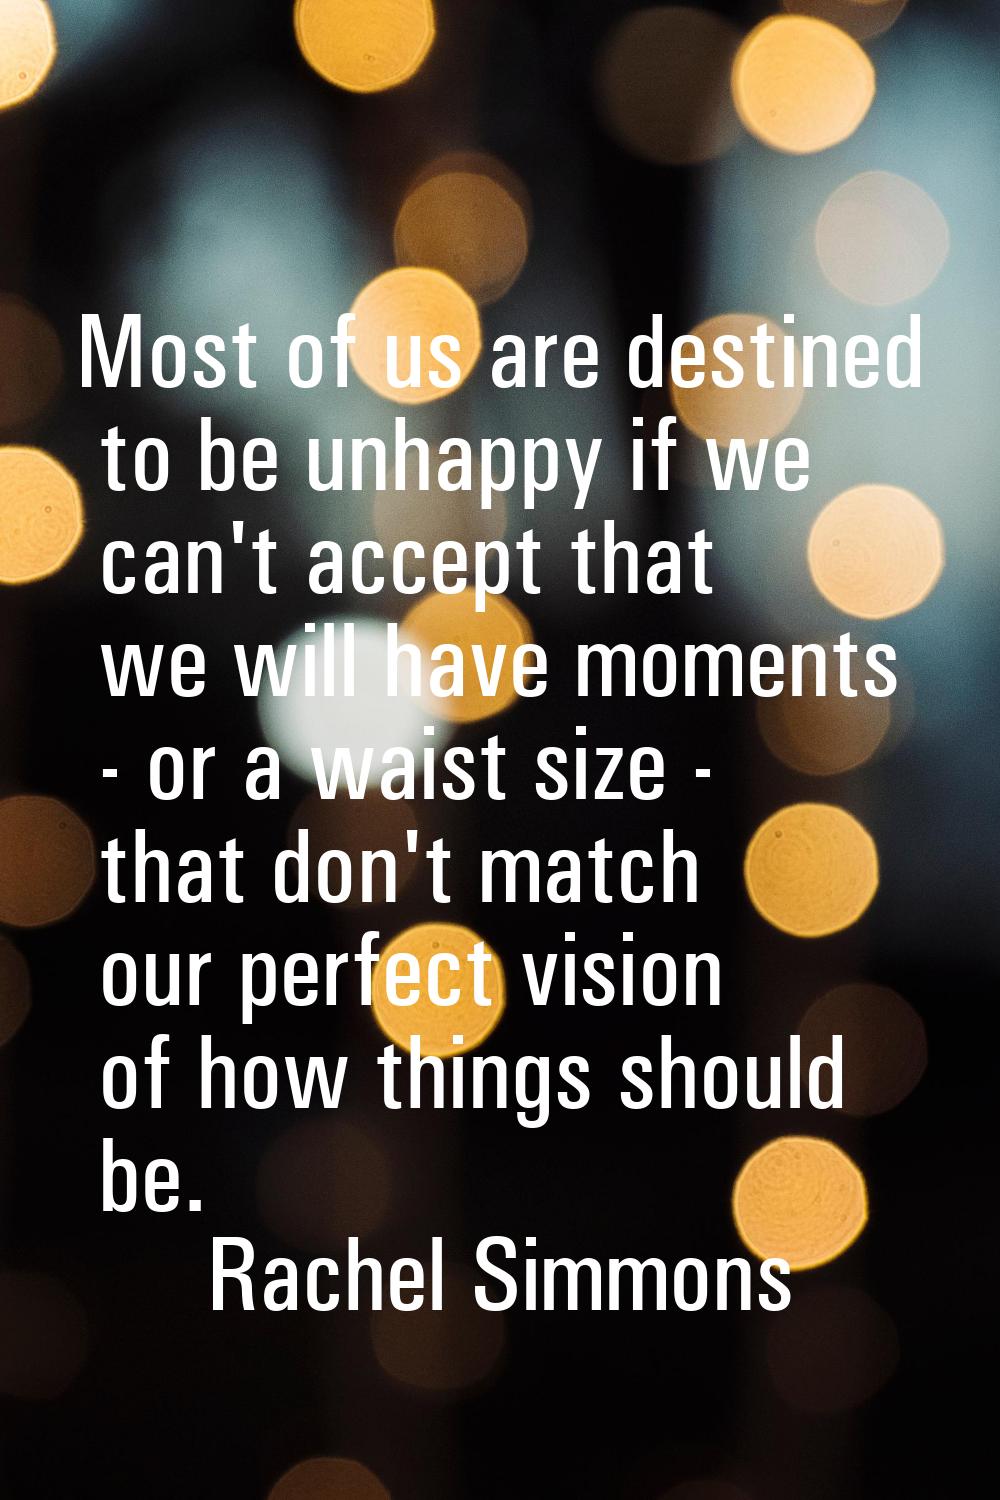 Most of us are destined to be unhappy if we can't accept that we will have moments - or a waist siz